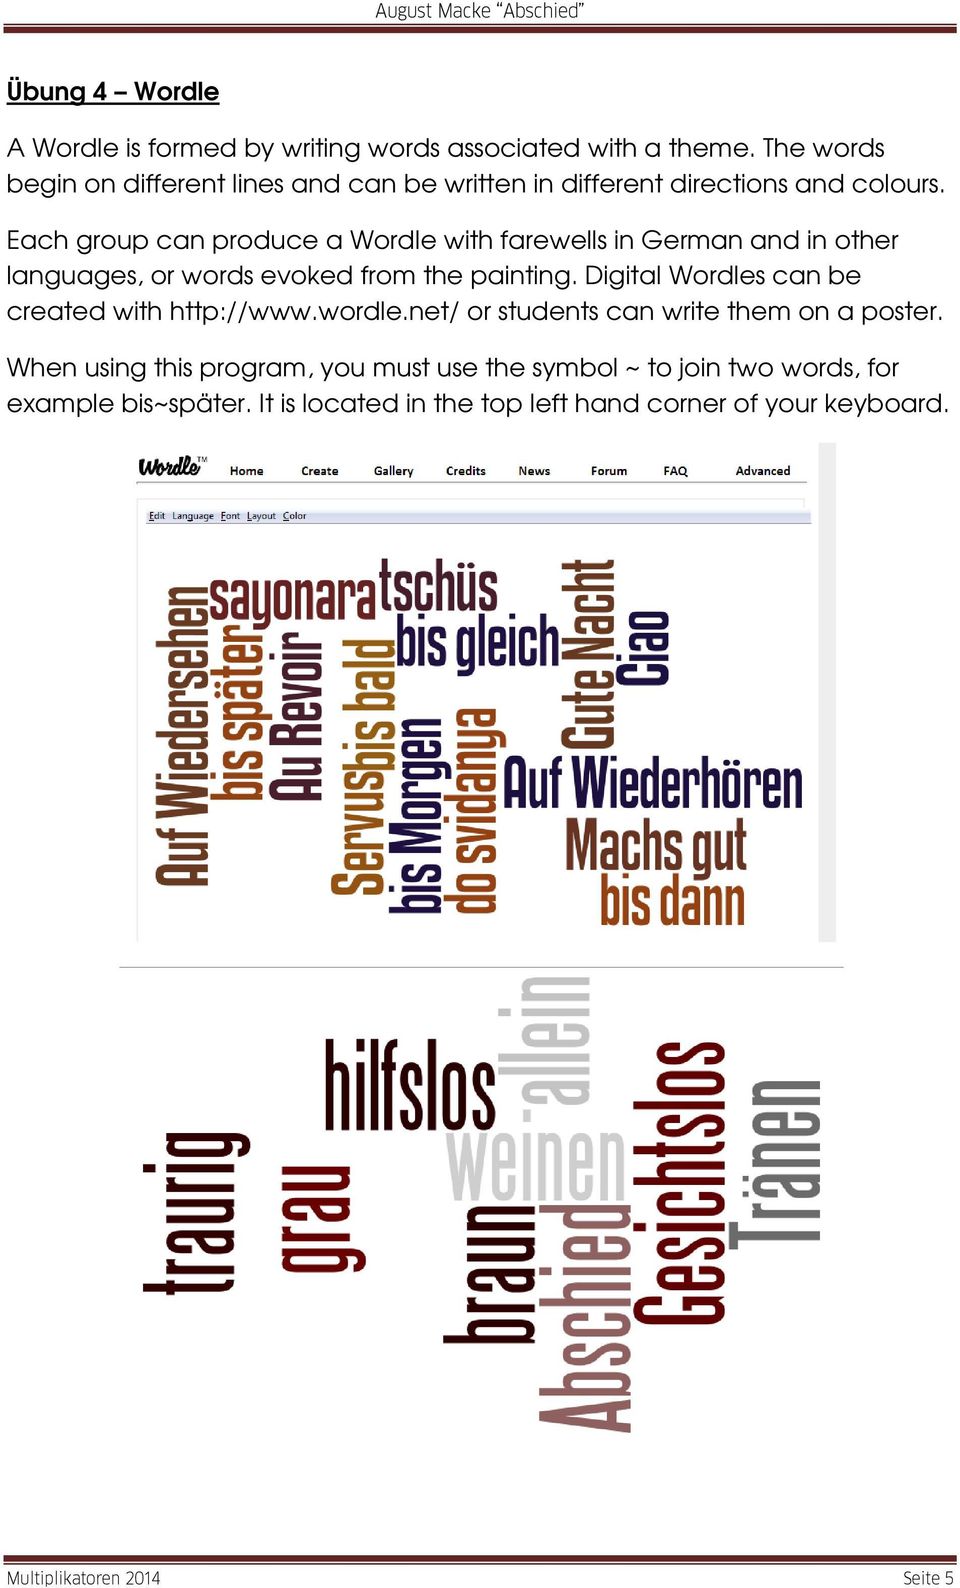 Each group can produce a Wordle with farewells in German and in other languages, or words evoked from the painting.